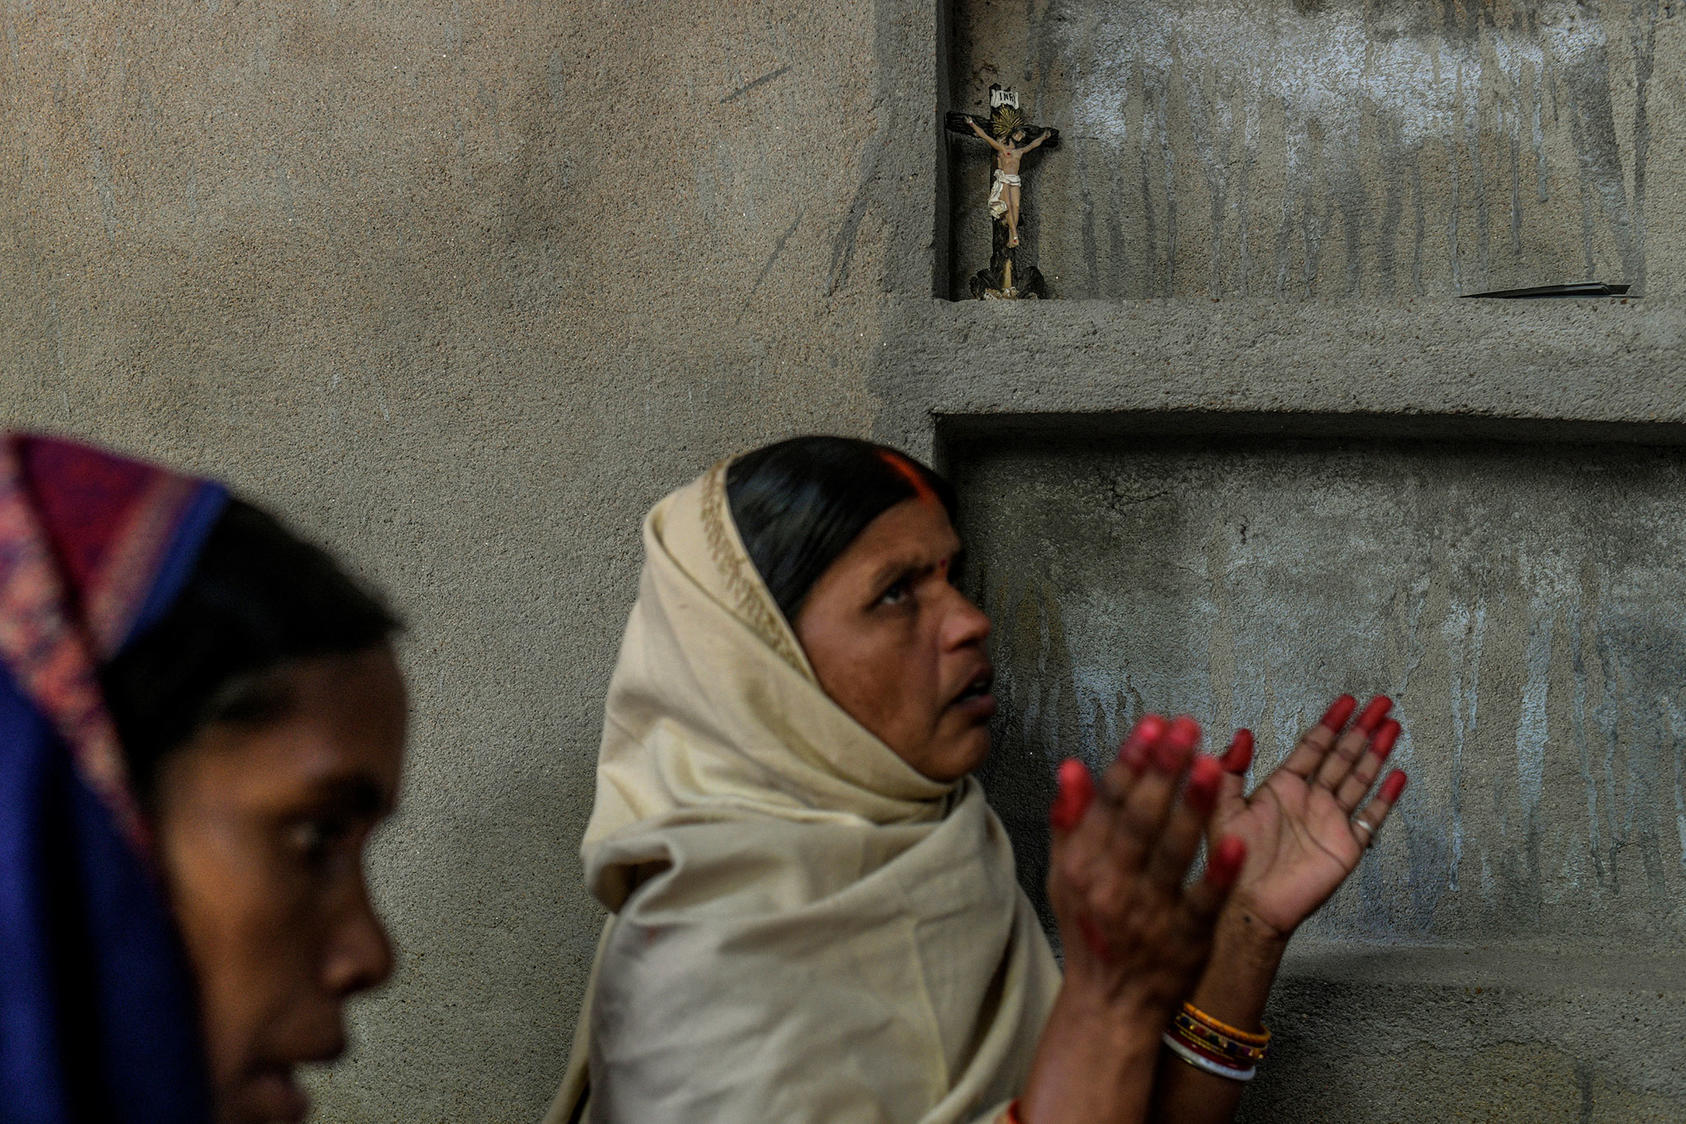 A small crucifix sits on a shelf at prayer meeting in secret amid an uptick in violence against Christians, in a village in the state of Bihar, India. February 12, 2021. (Atul Loke/The New York Times)]